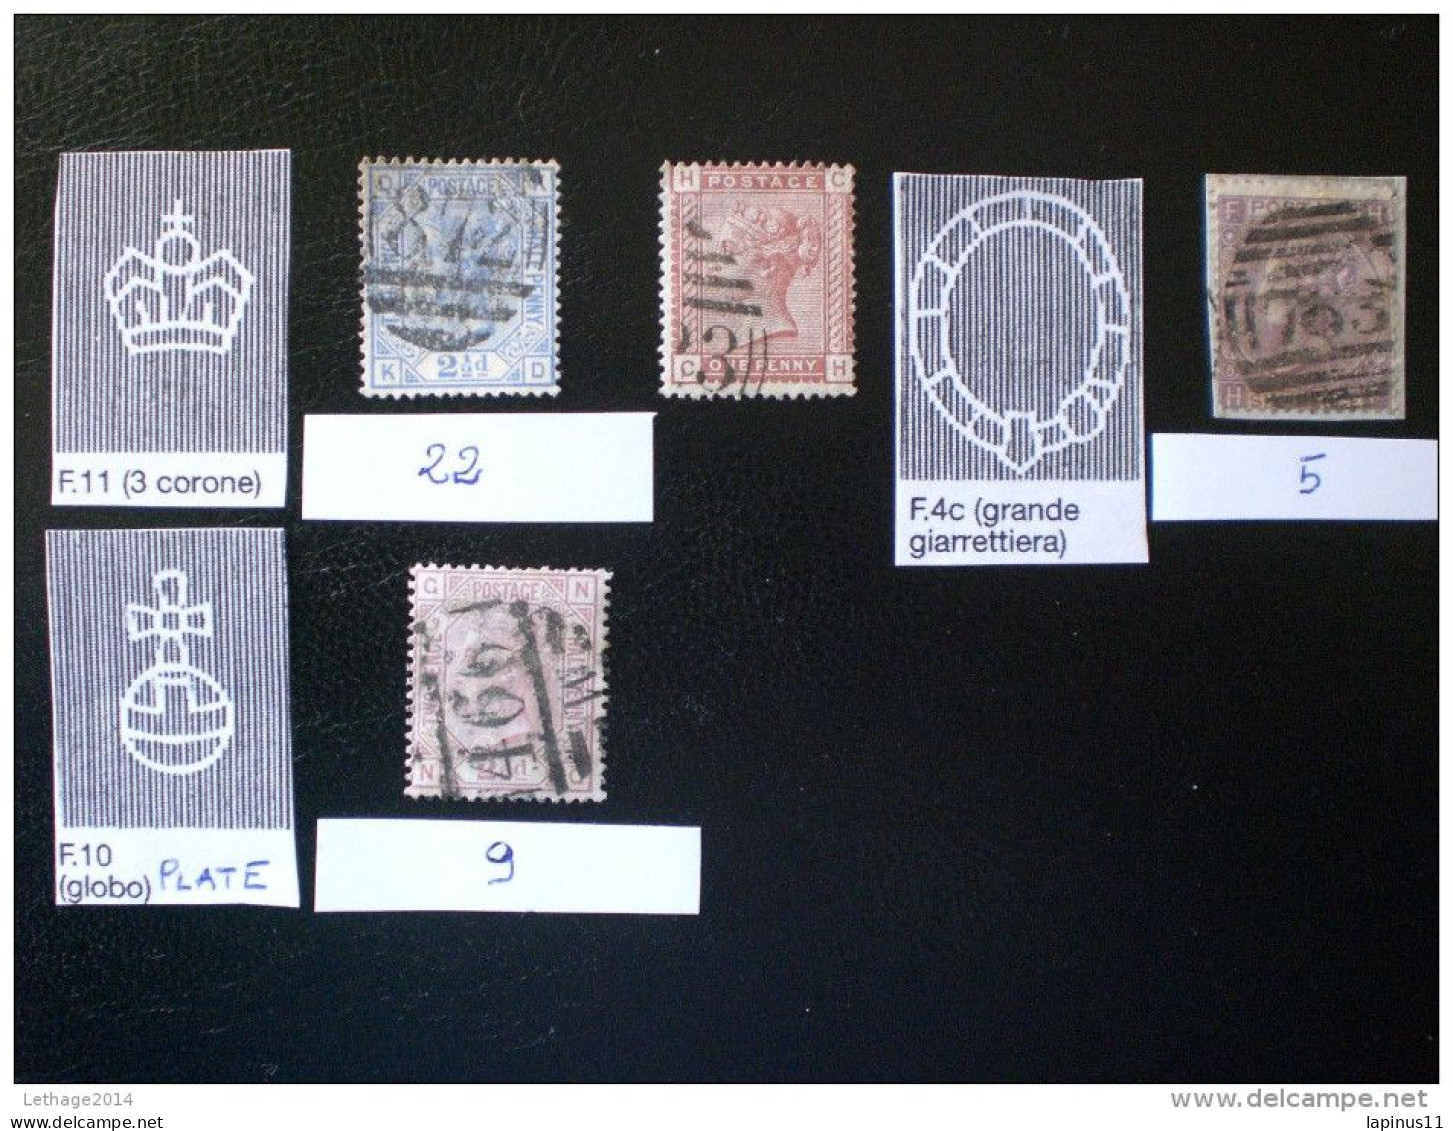 England Inghilterra: Great Britain: Queen Victoria HIGH VALOUR CATALOG - Used Stamps